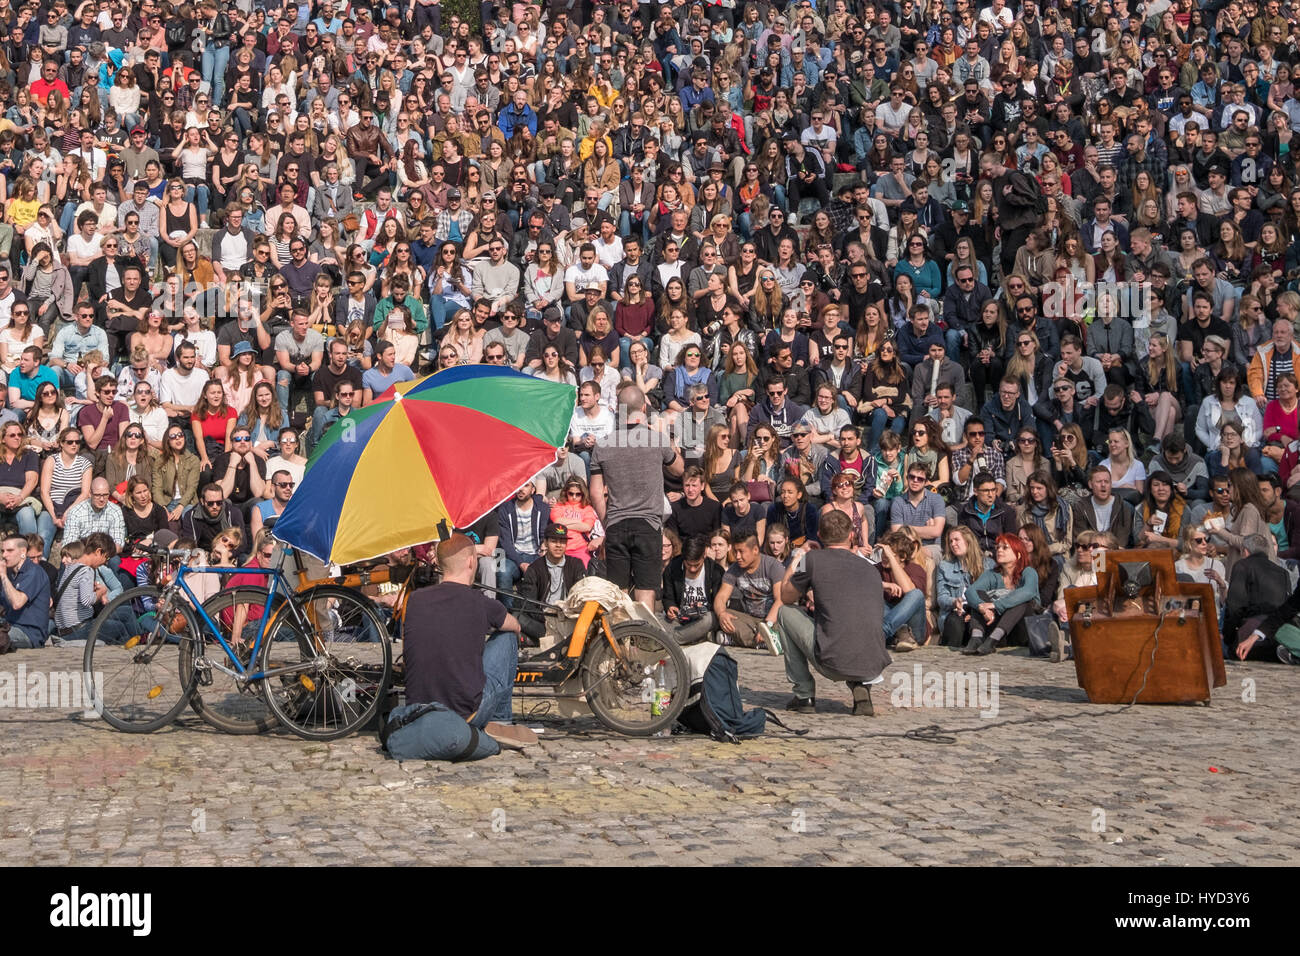 Berlin, Germany - april 02, 2017: People at Mauerpark watching the sundays Karaoke show in Berlin, Germany. Stock Photo